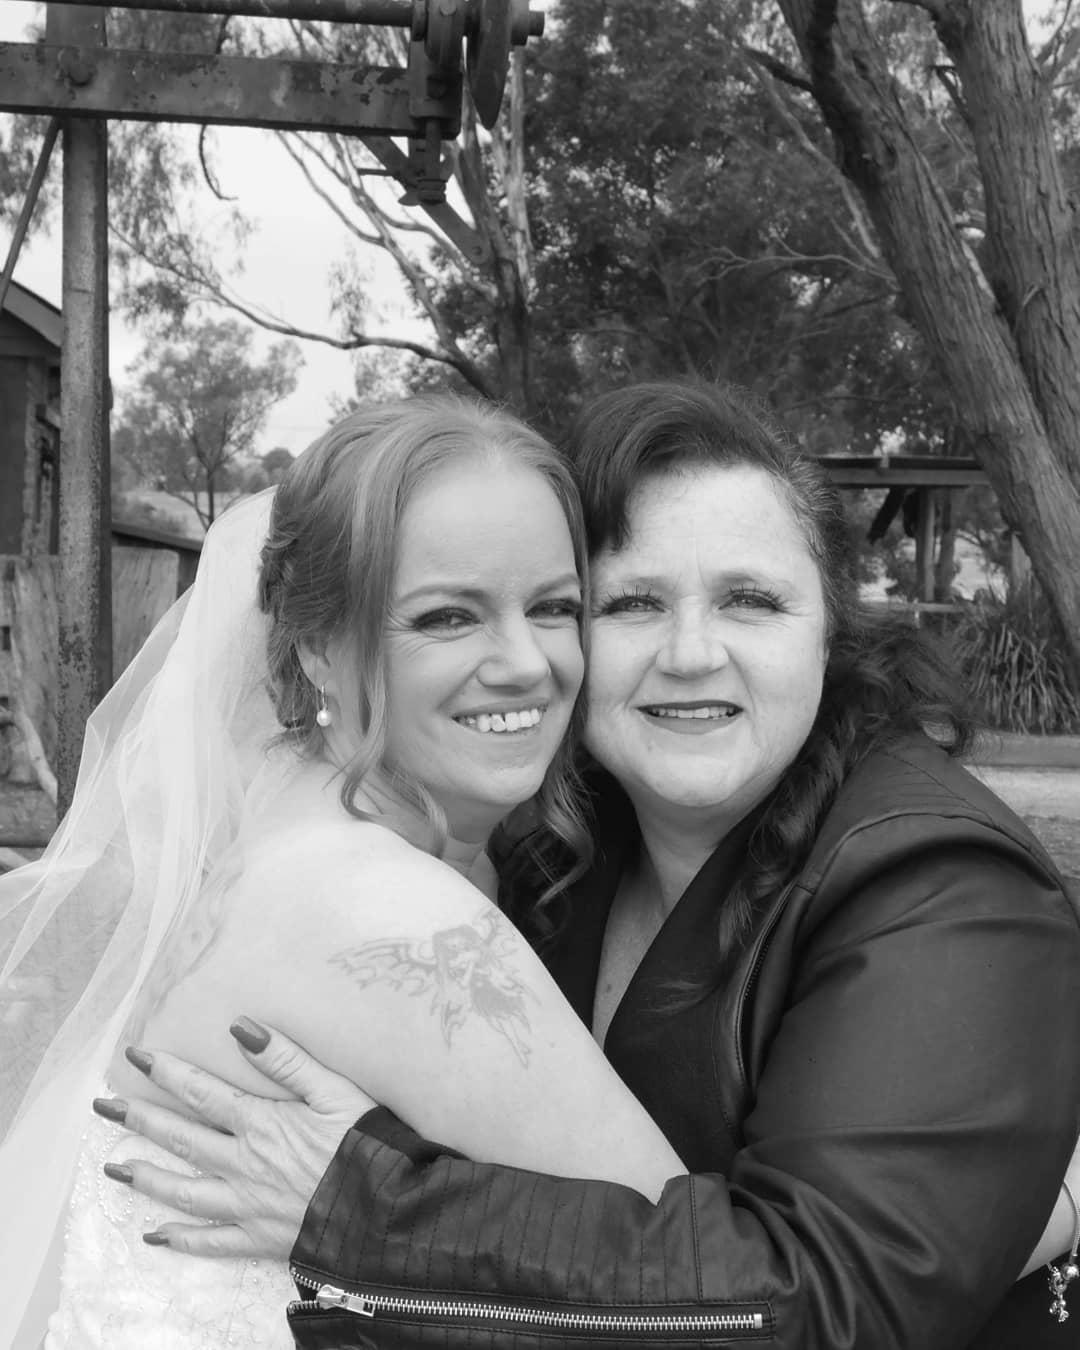 Chrissie with her mother-in-law Kylie. (Courtesy of Natalie Dunn via <a href="https://www.facebook.com/chrissie.wells.1">Chrissie Smith</a>)